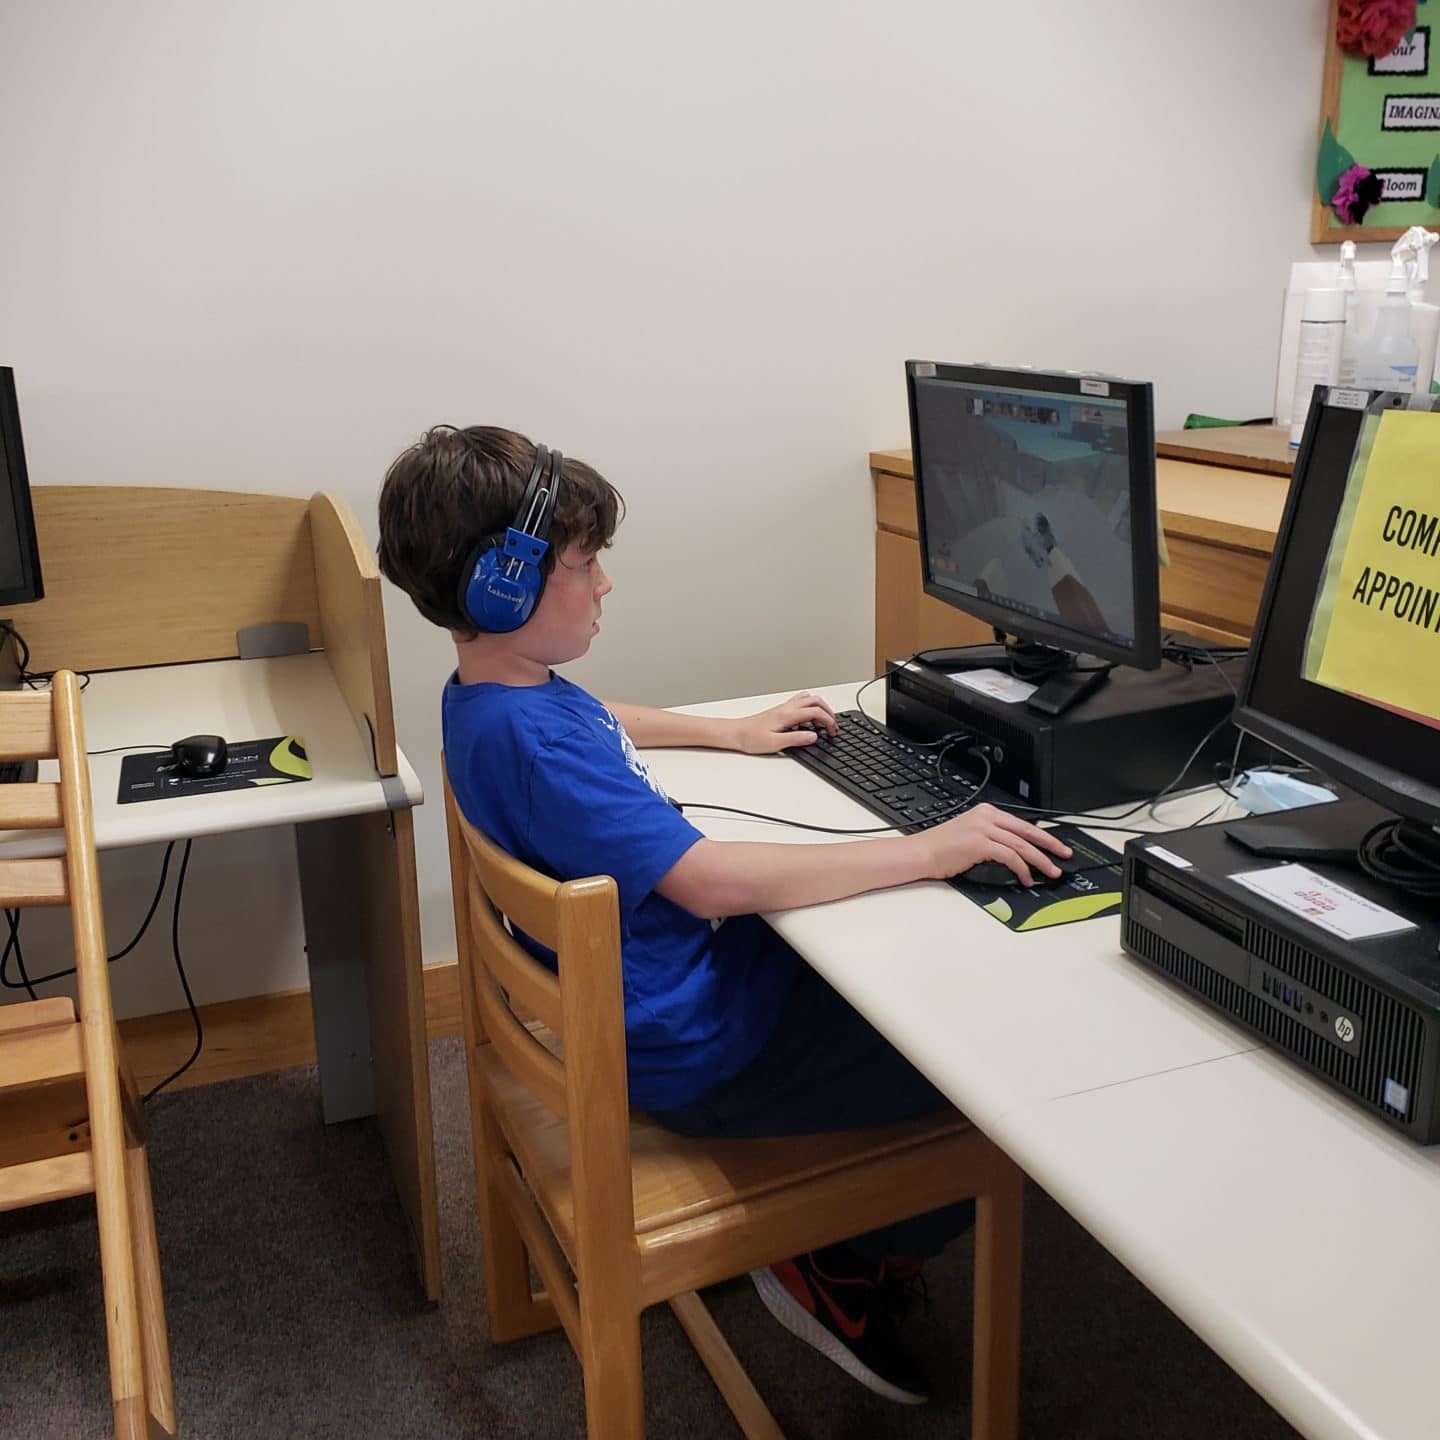 Child on Computer at the Library